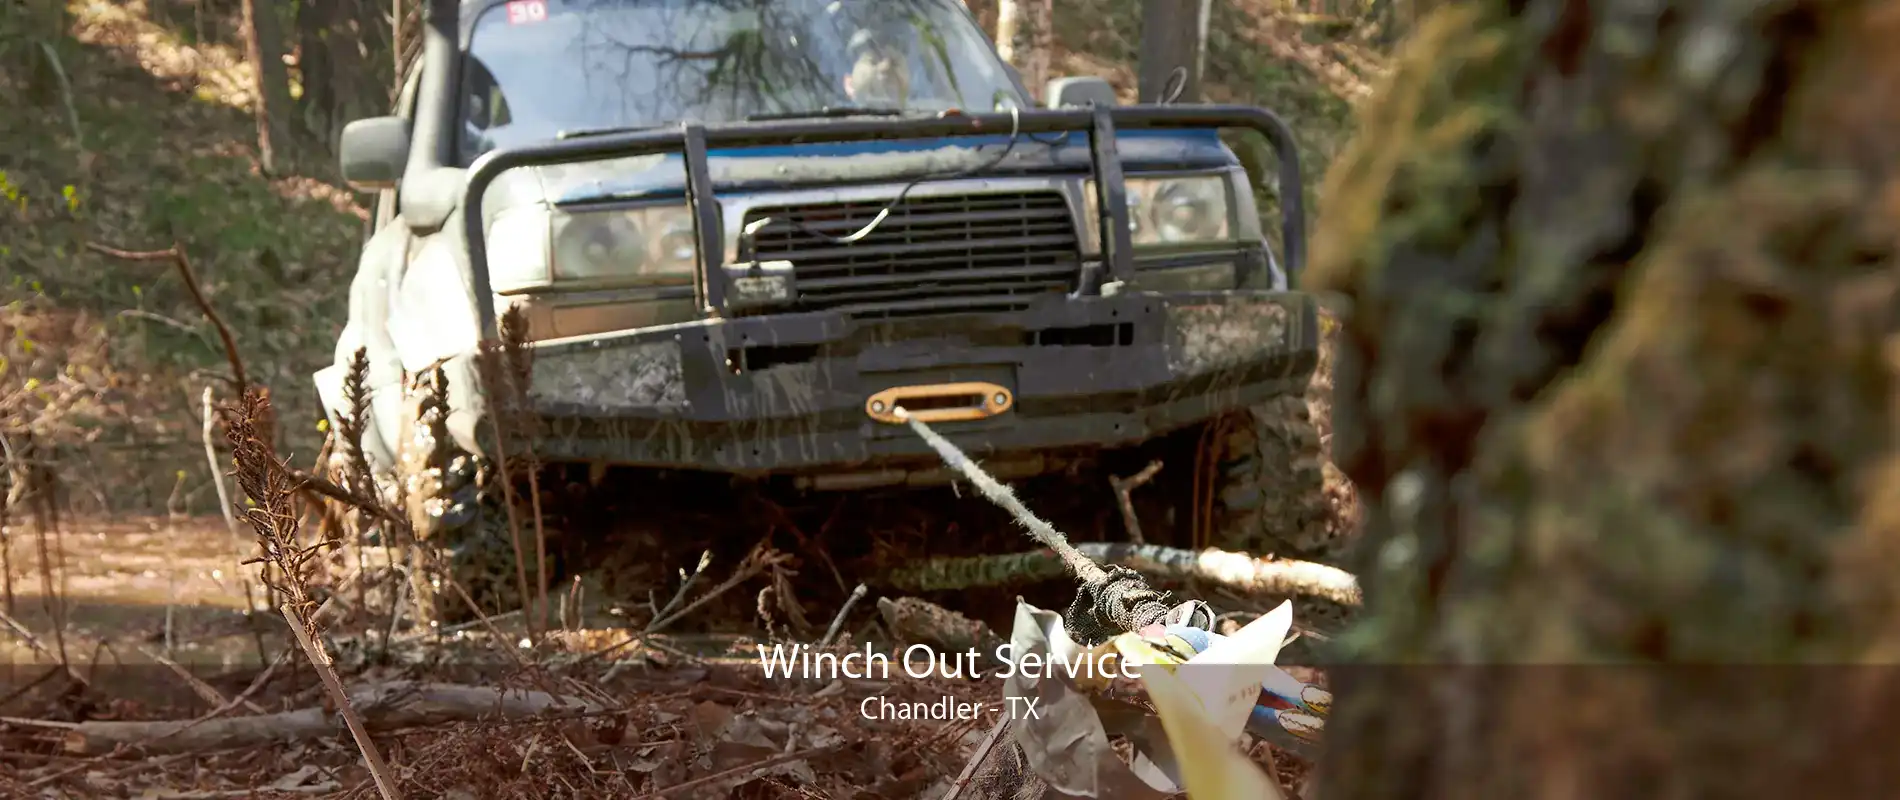 Winch Out Service Chandler - TX